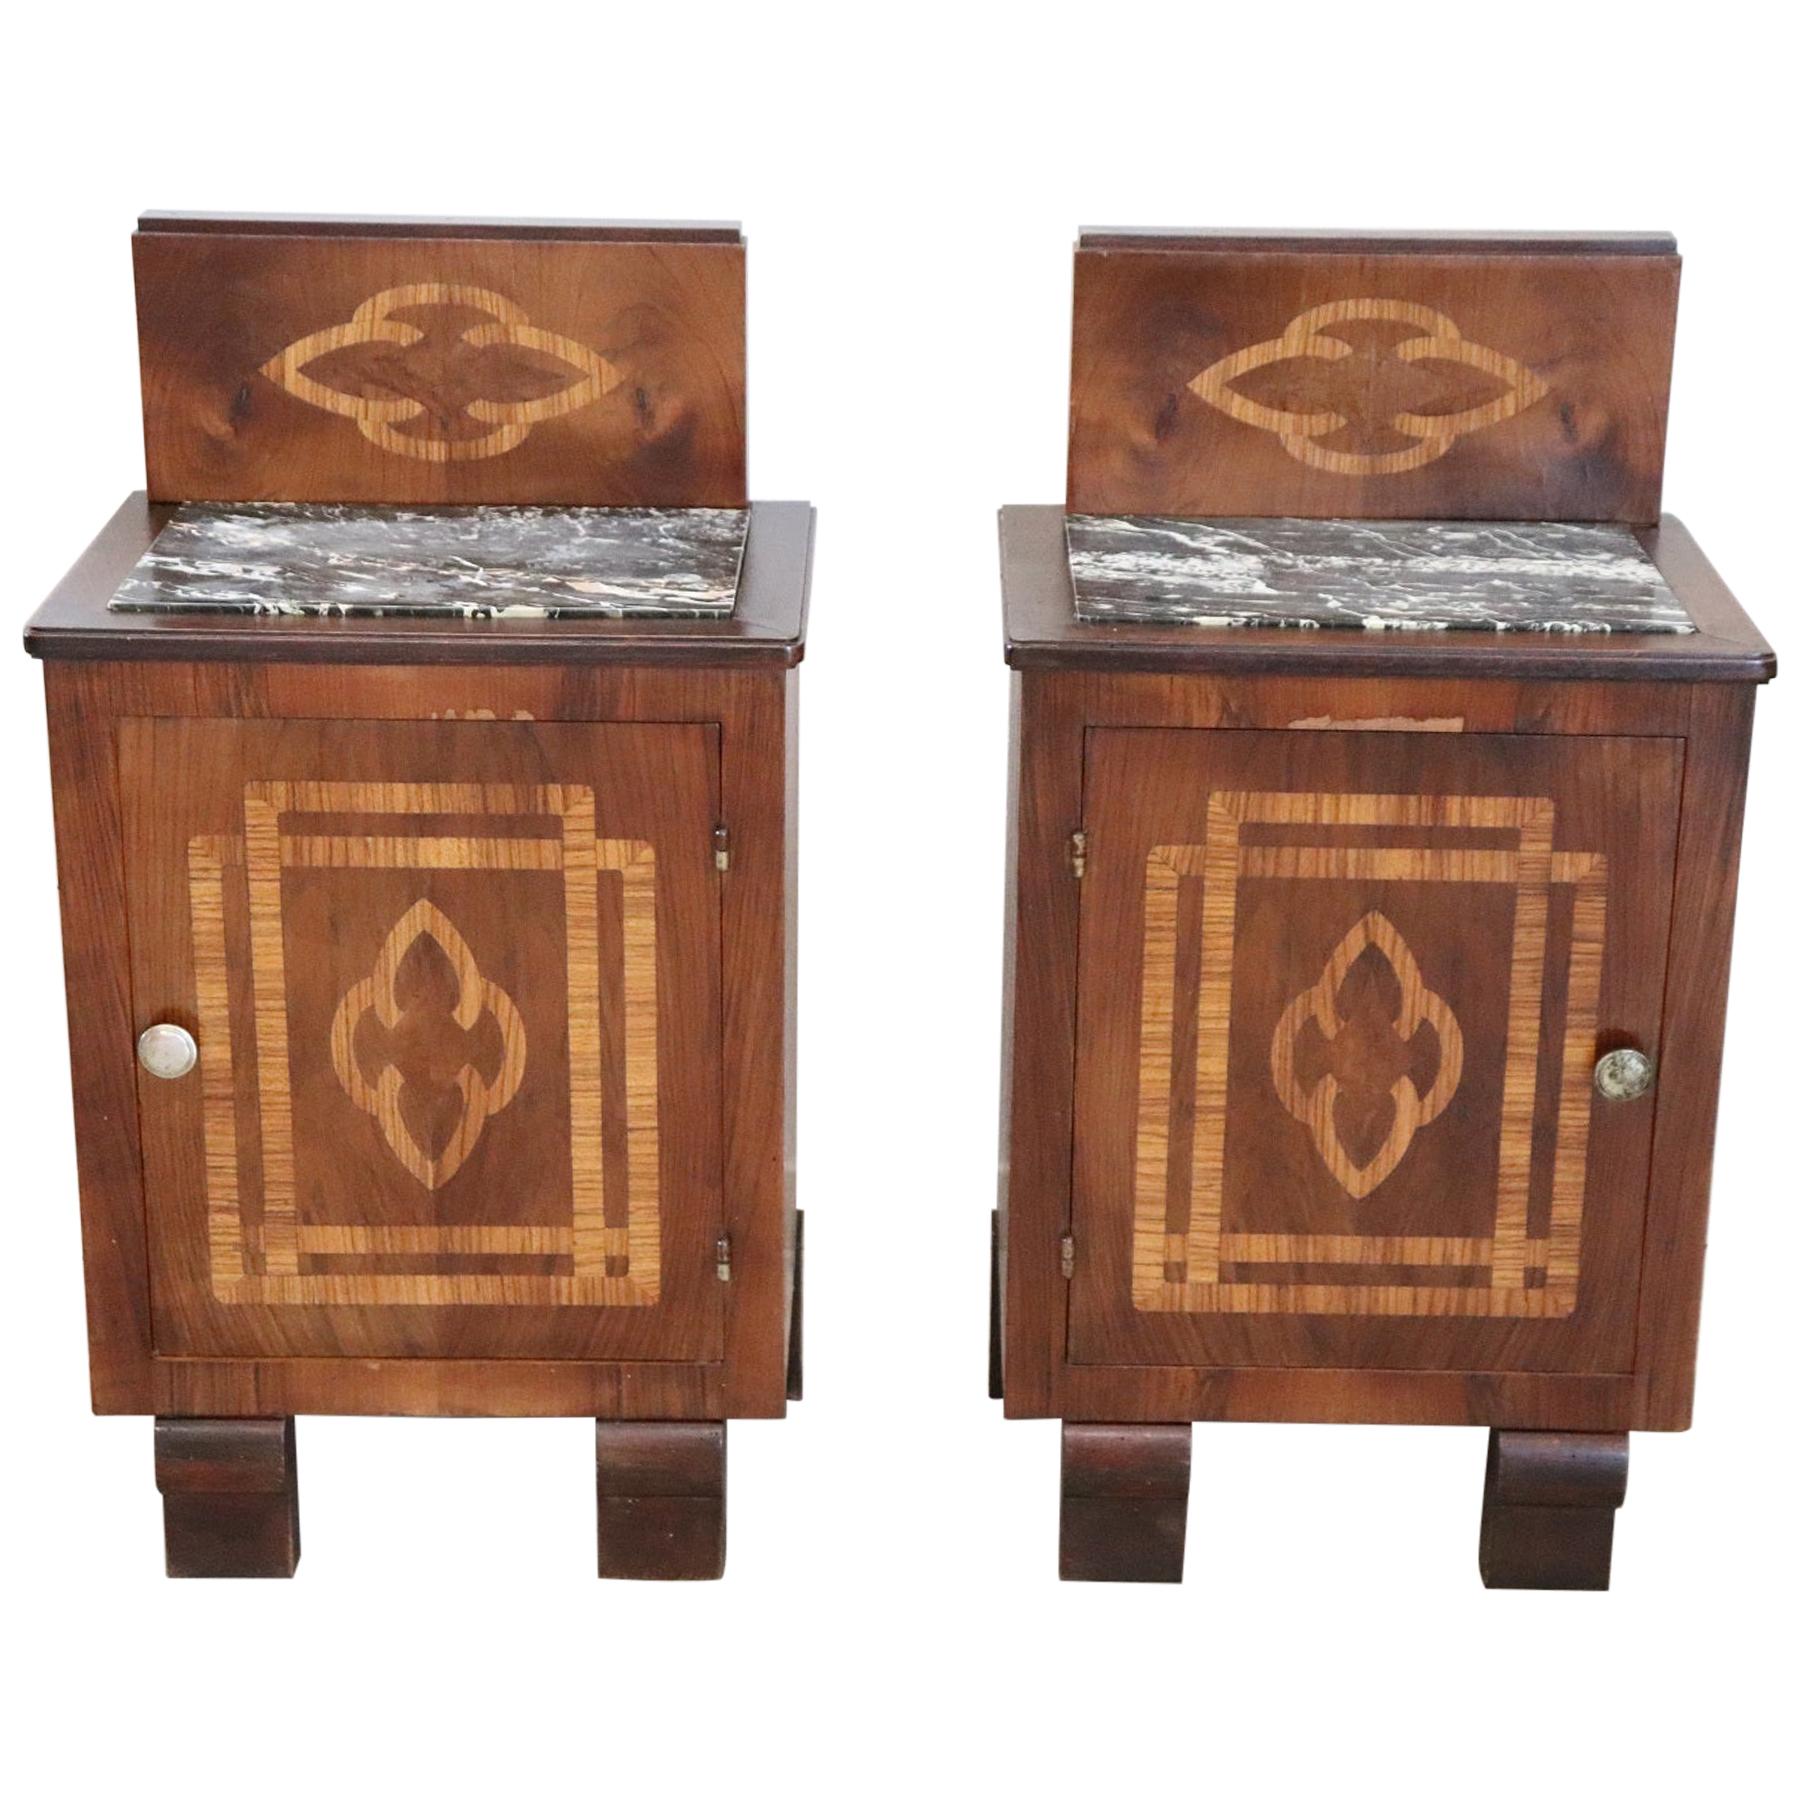 20th Century Italian Art Deco Walnut Inlaid Pair of Nightstands with Marble Top For Sale